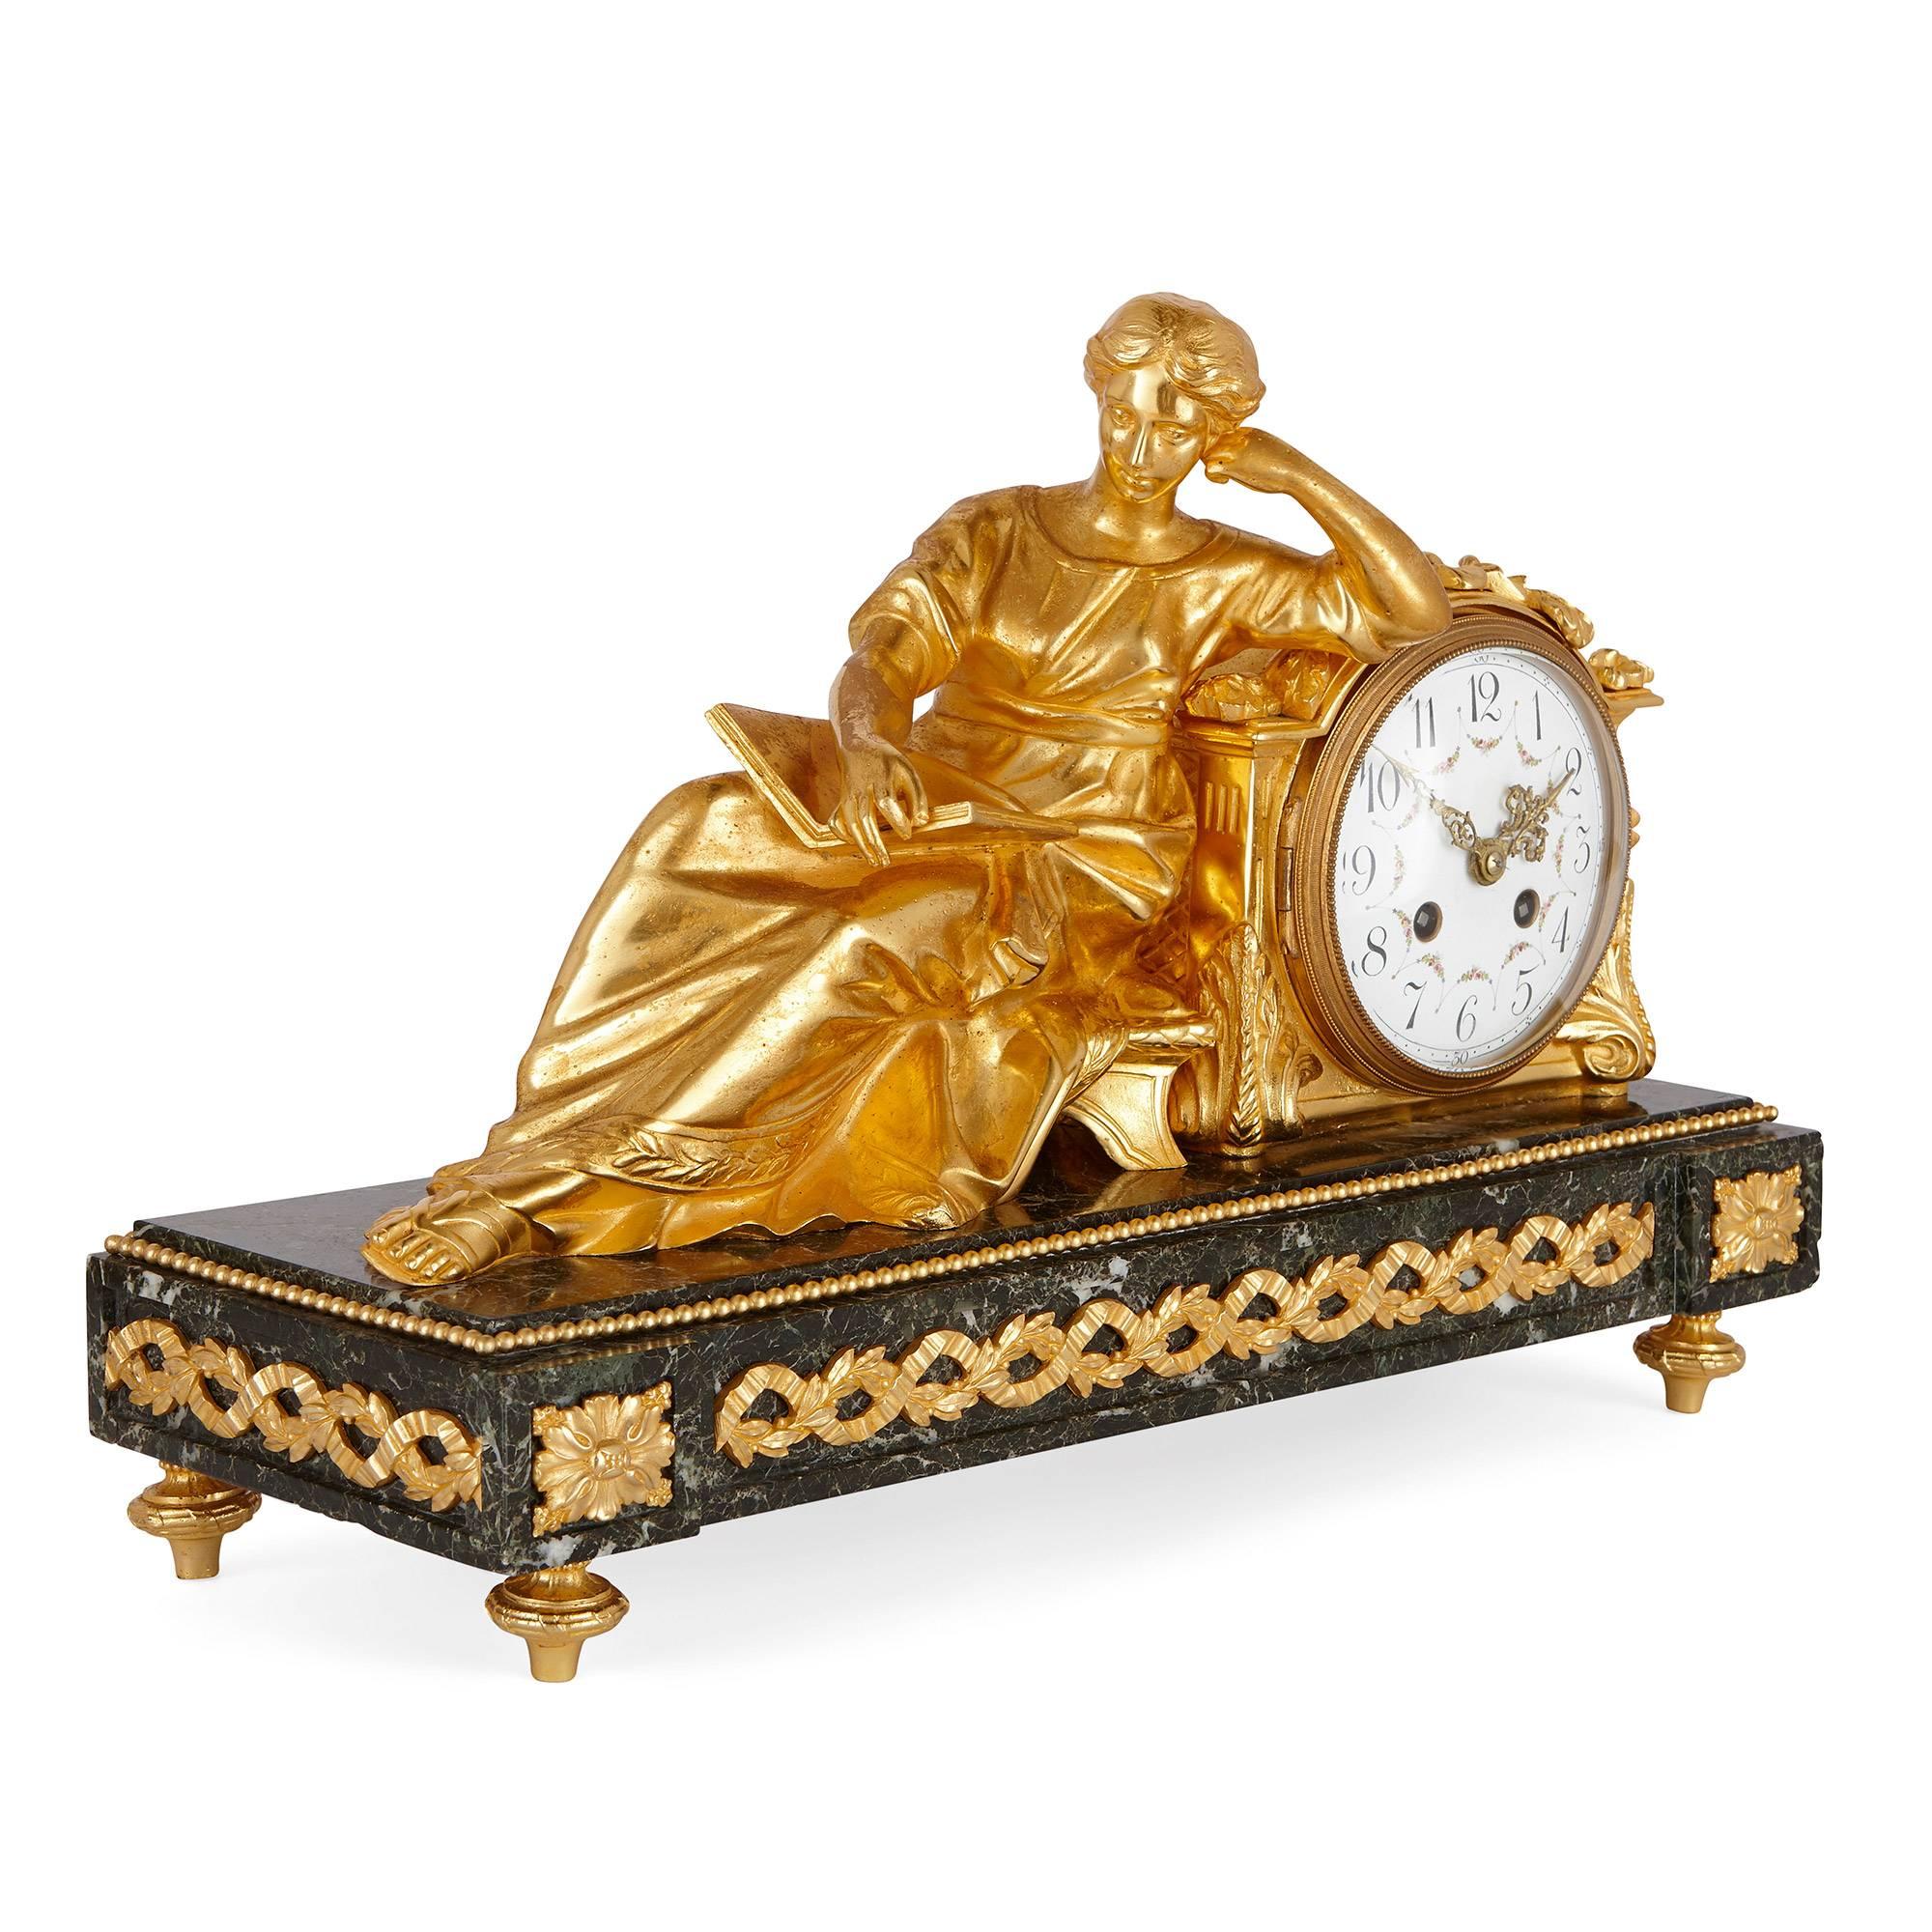 The gilt metal clock on green veined marble base depicting a seated lady holding a book, with a pair of matching urns of similar style.

8-day striking movement, stamped with an oval cartouche depicting an 'A' beneath a crown.

This fine antique